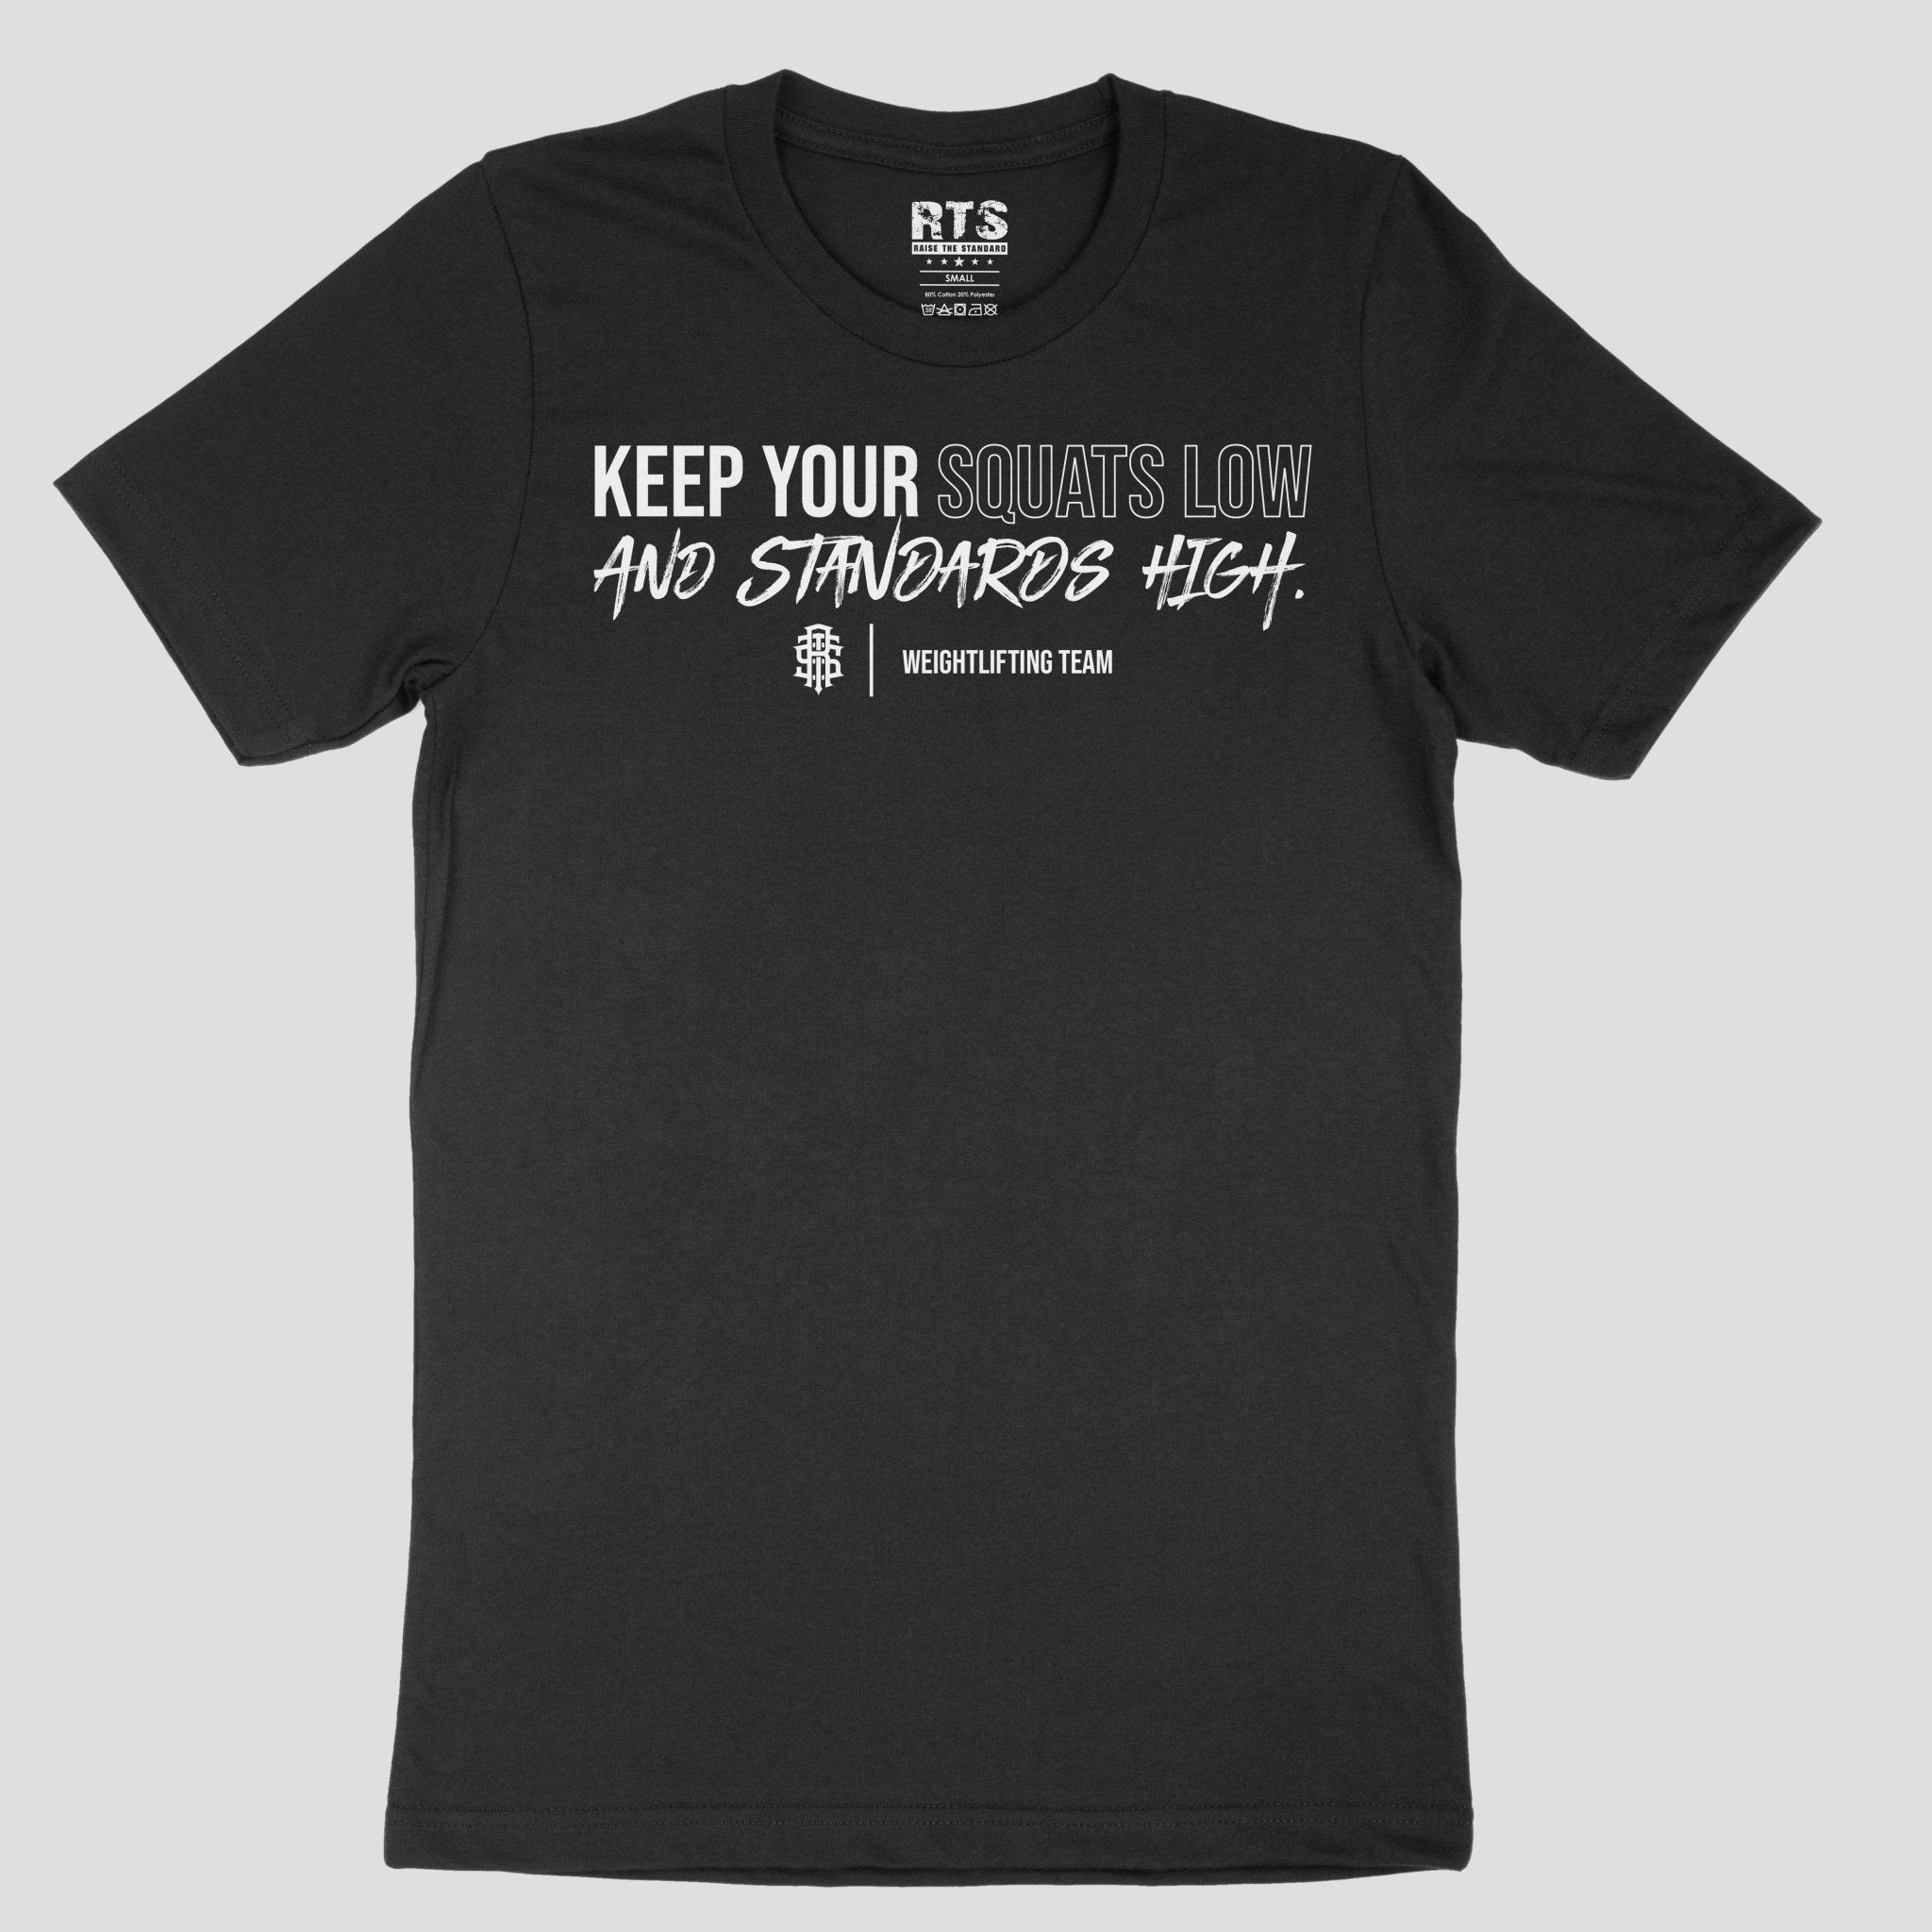 Keep your squats low and standards high T-shirt - Raise The Standard Apparel